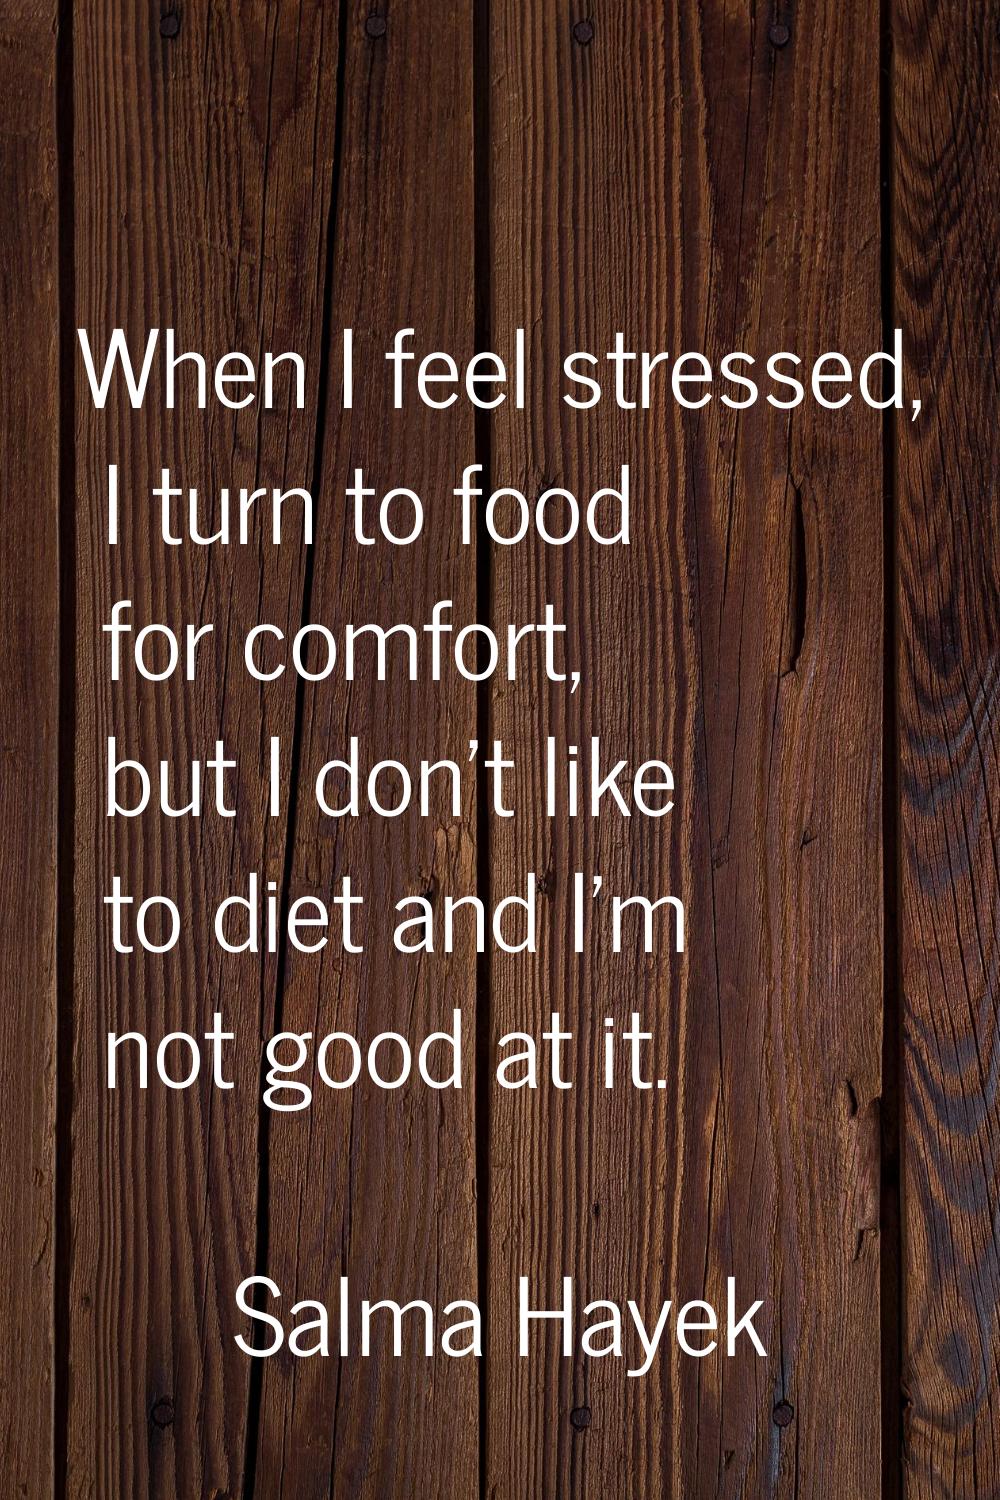 When I feel stressed, I turn to food for comfort, but I don't like to diet and I'm not good at it.